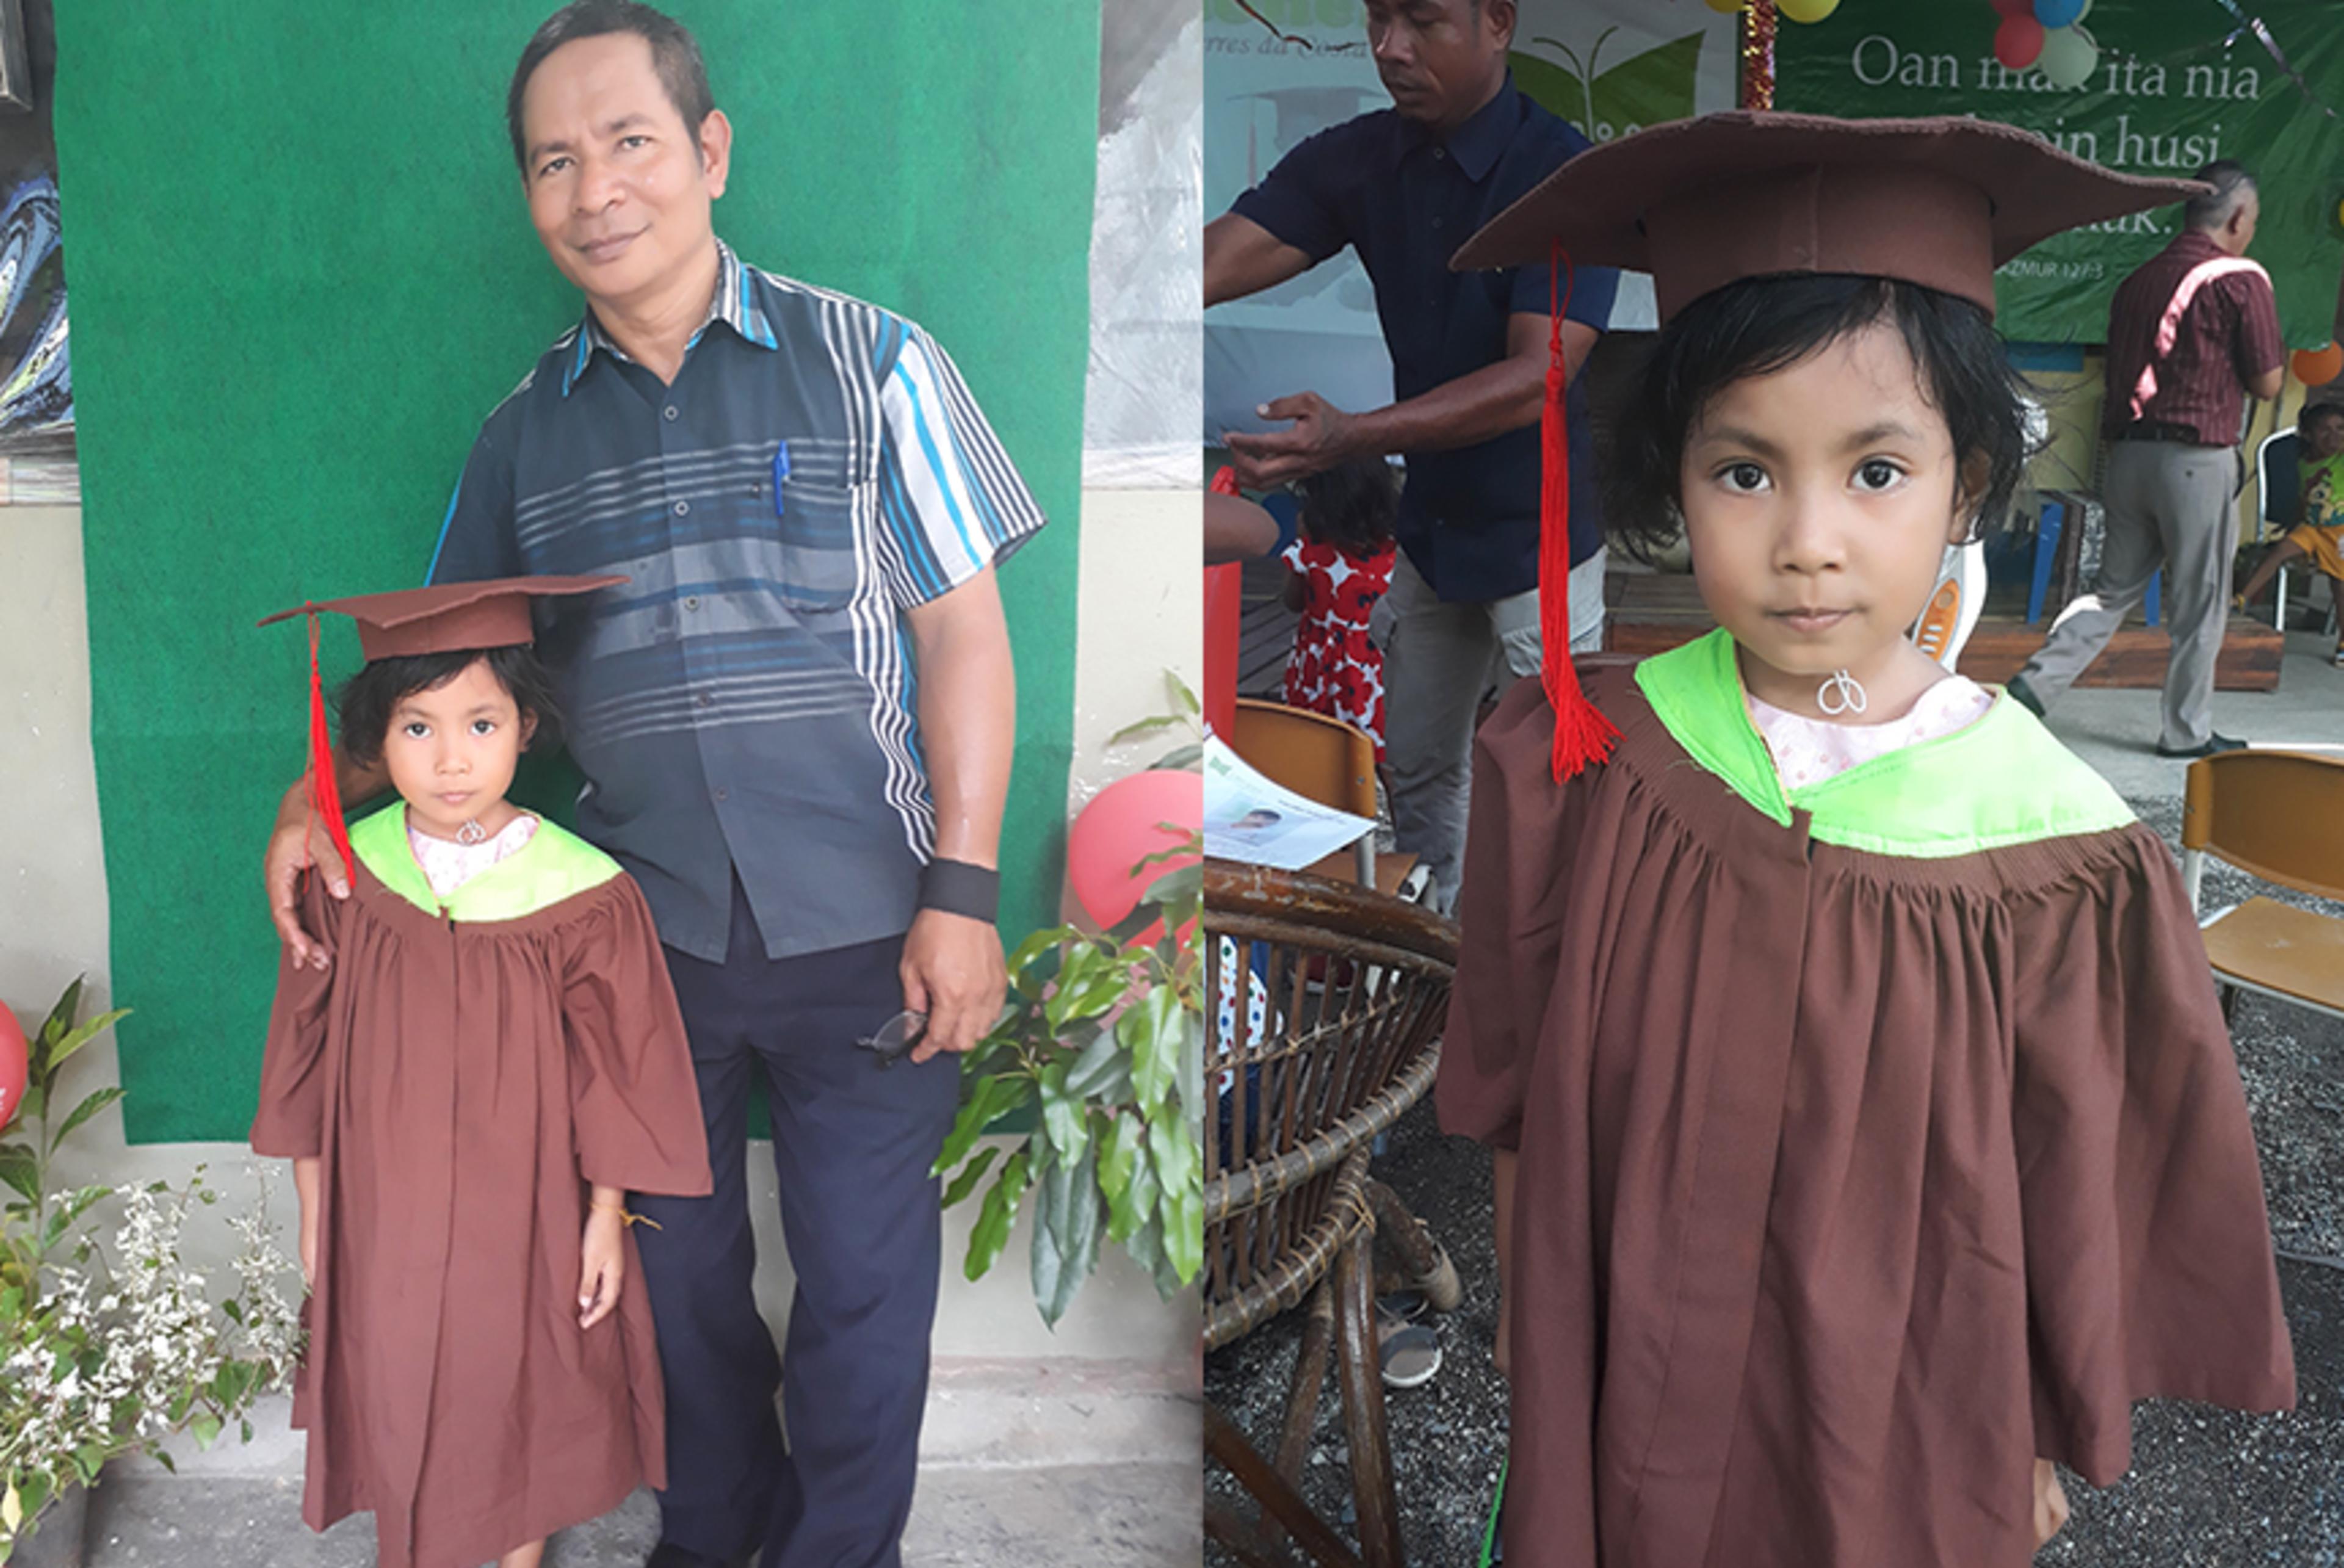 Vicente with Francisca at her preschool graduation   